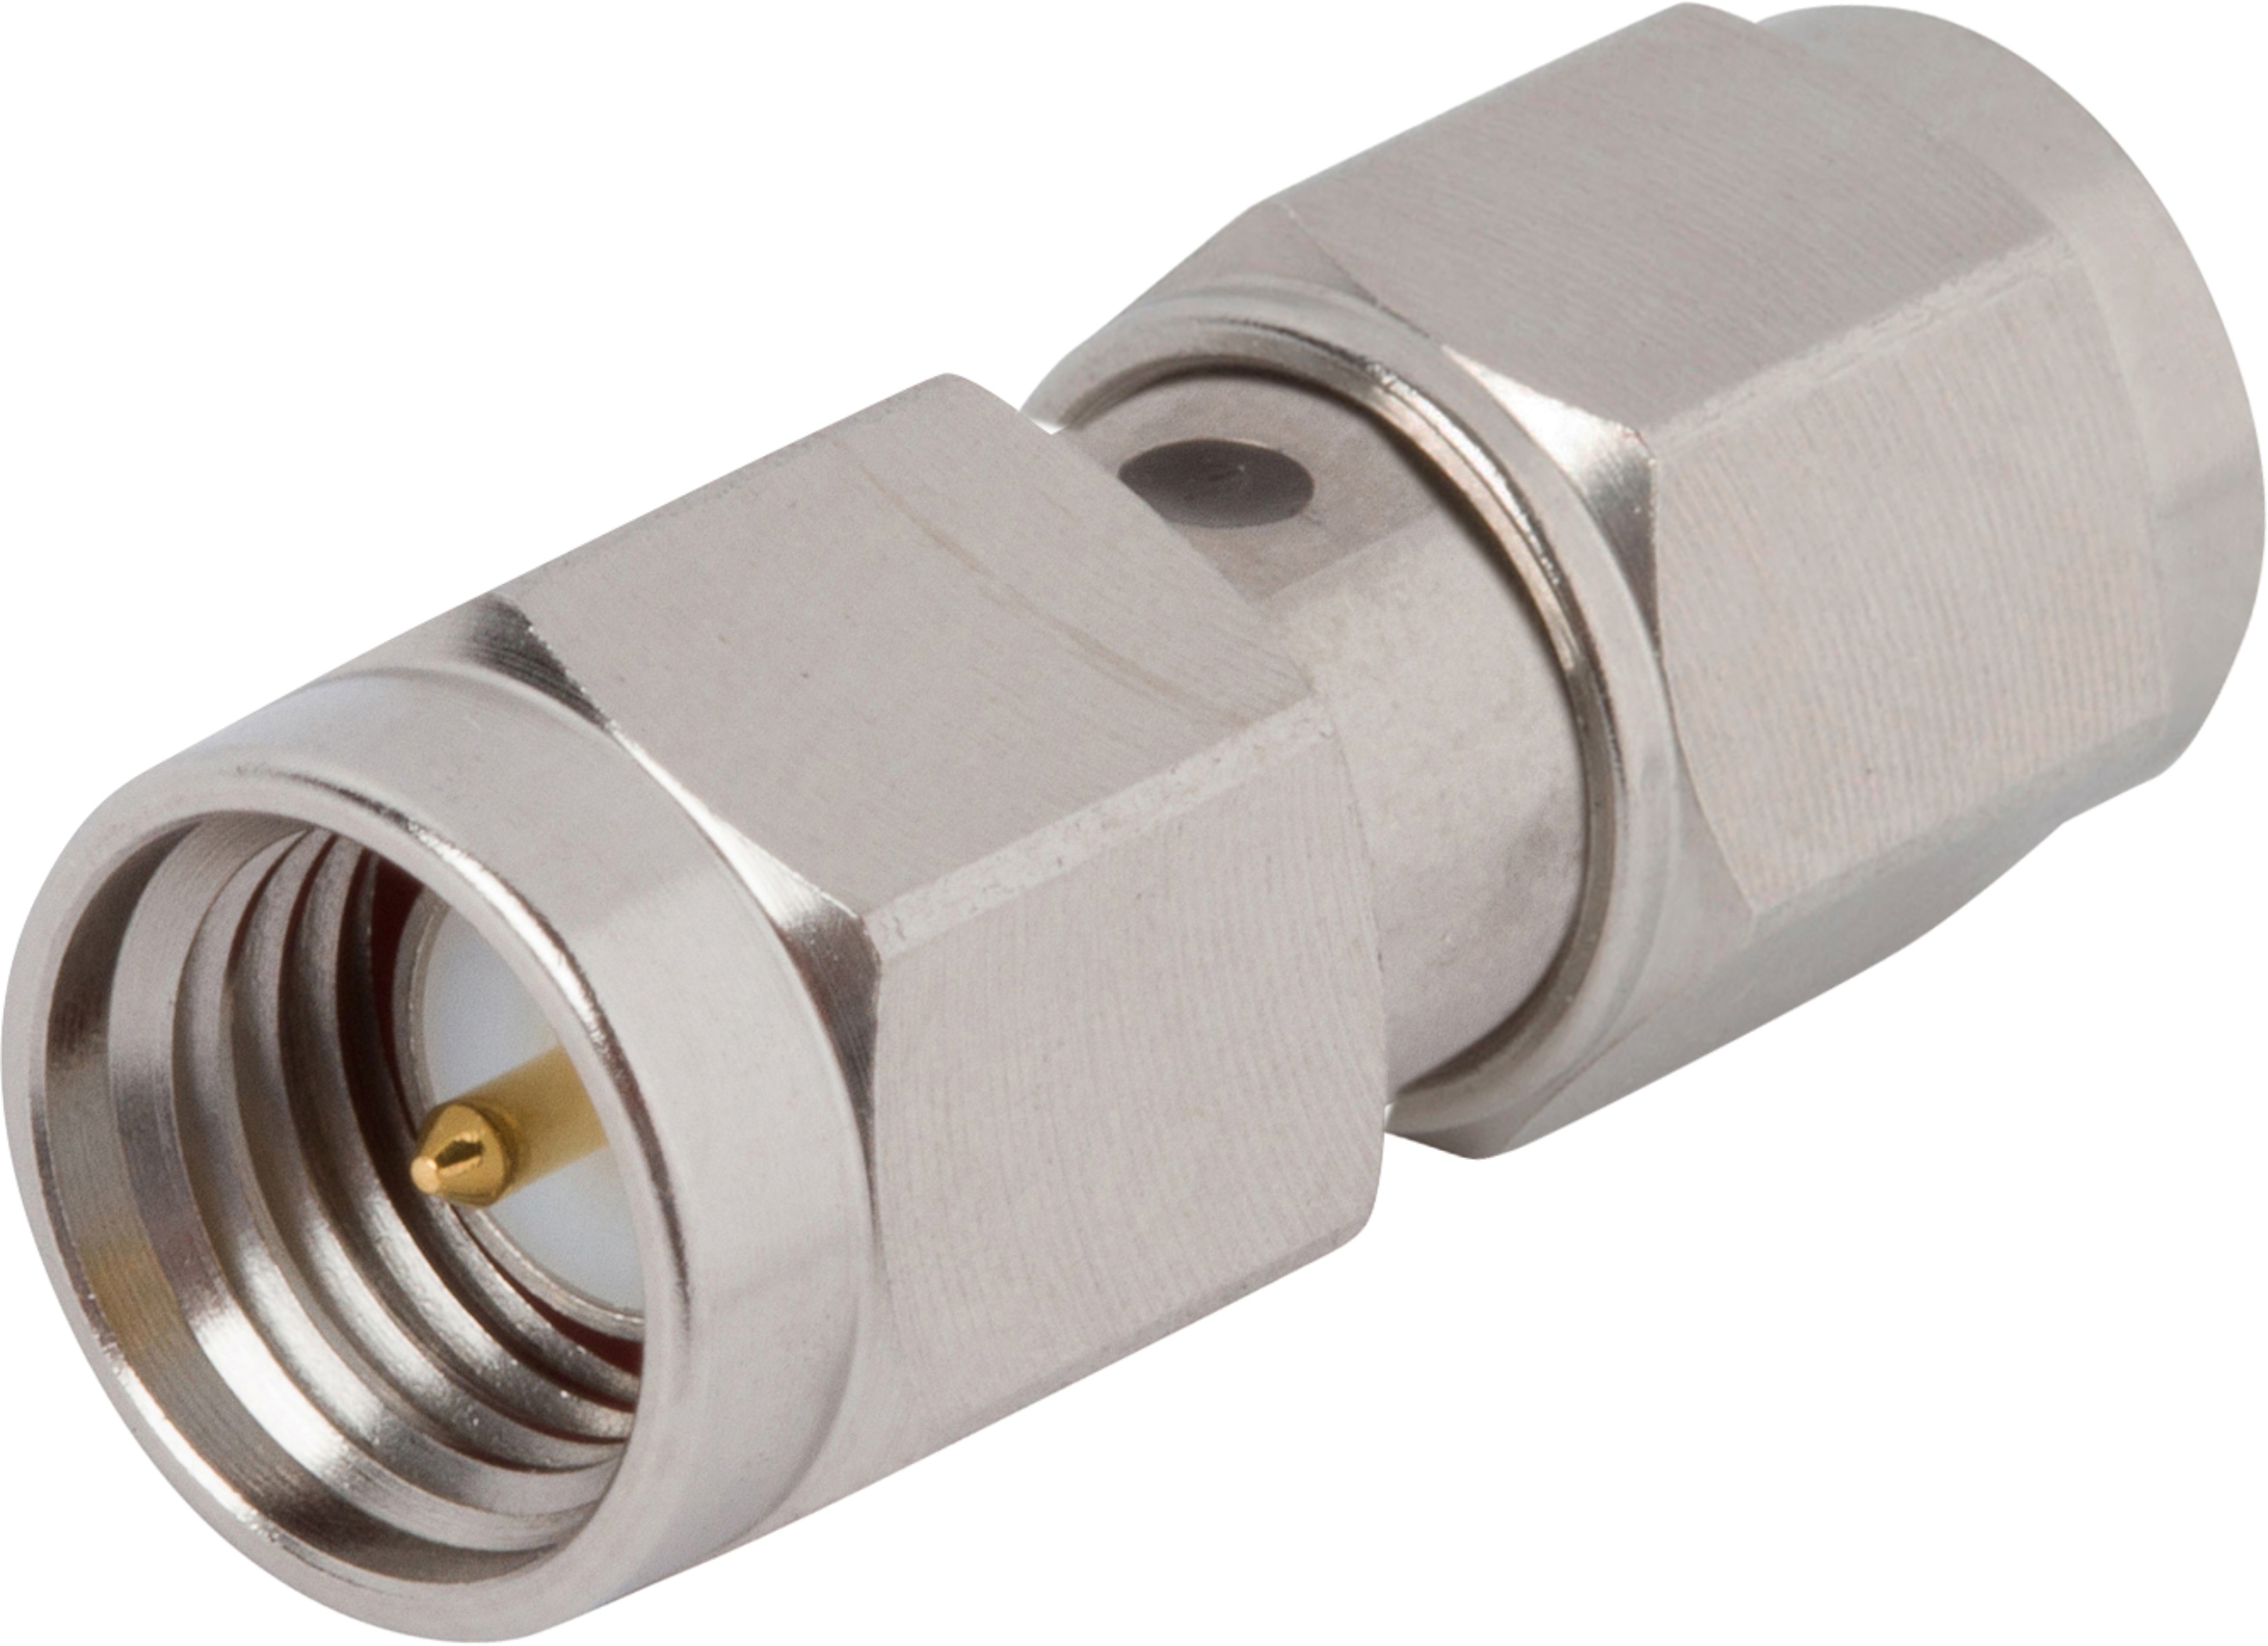 SMA Male to Male Adapter, M55339/29-30101